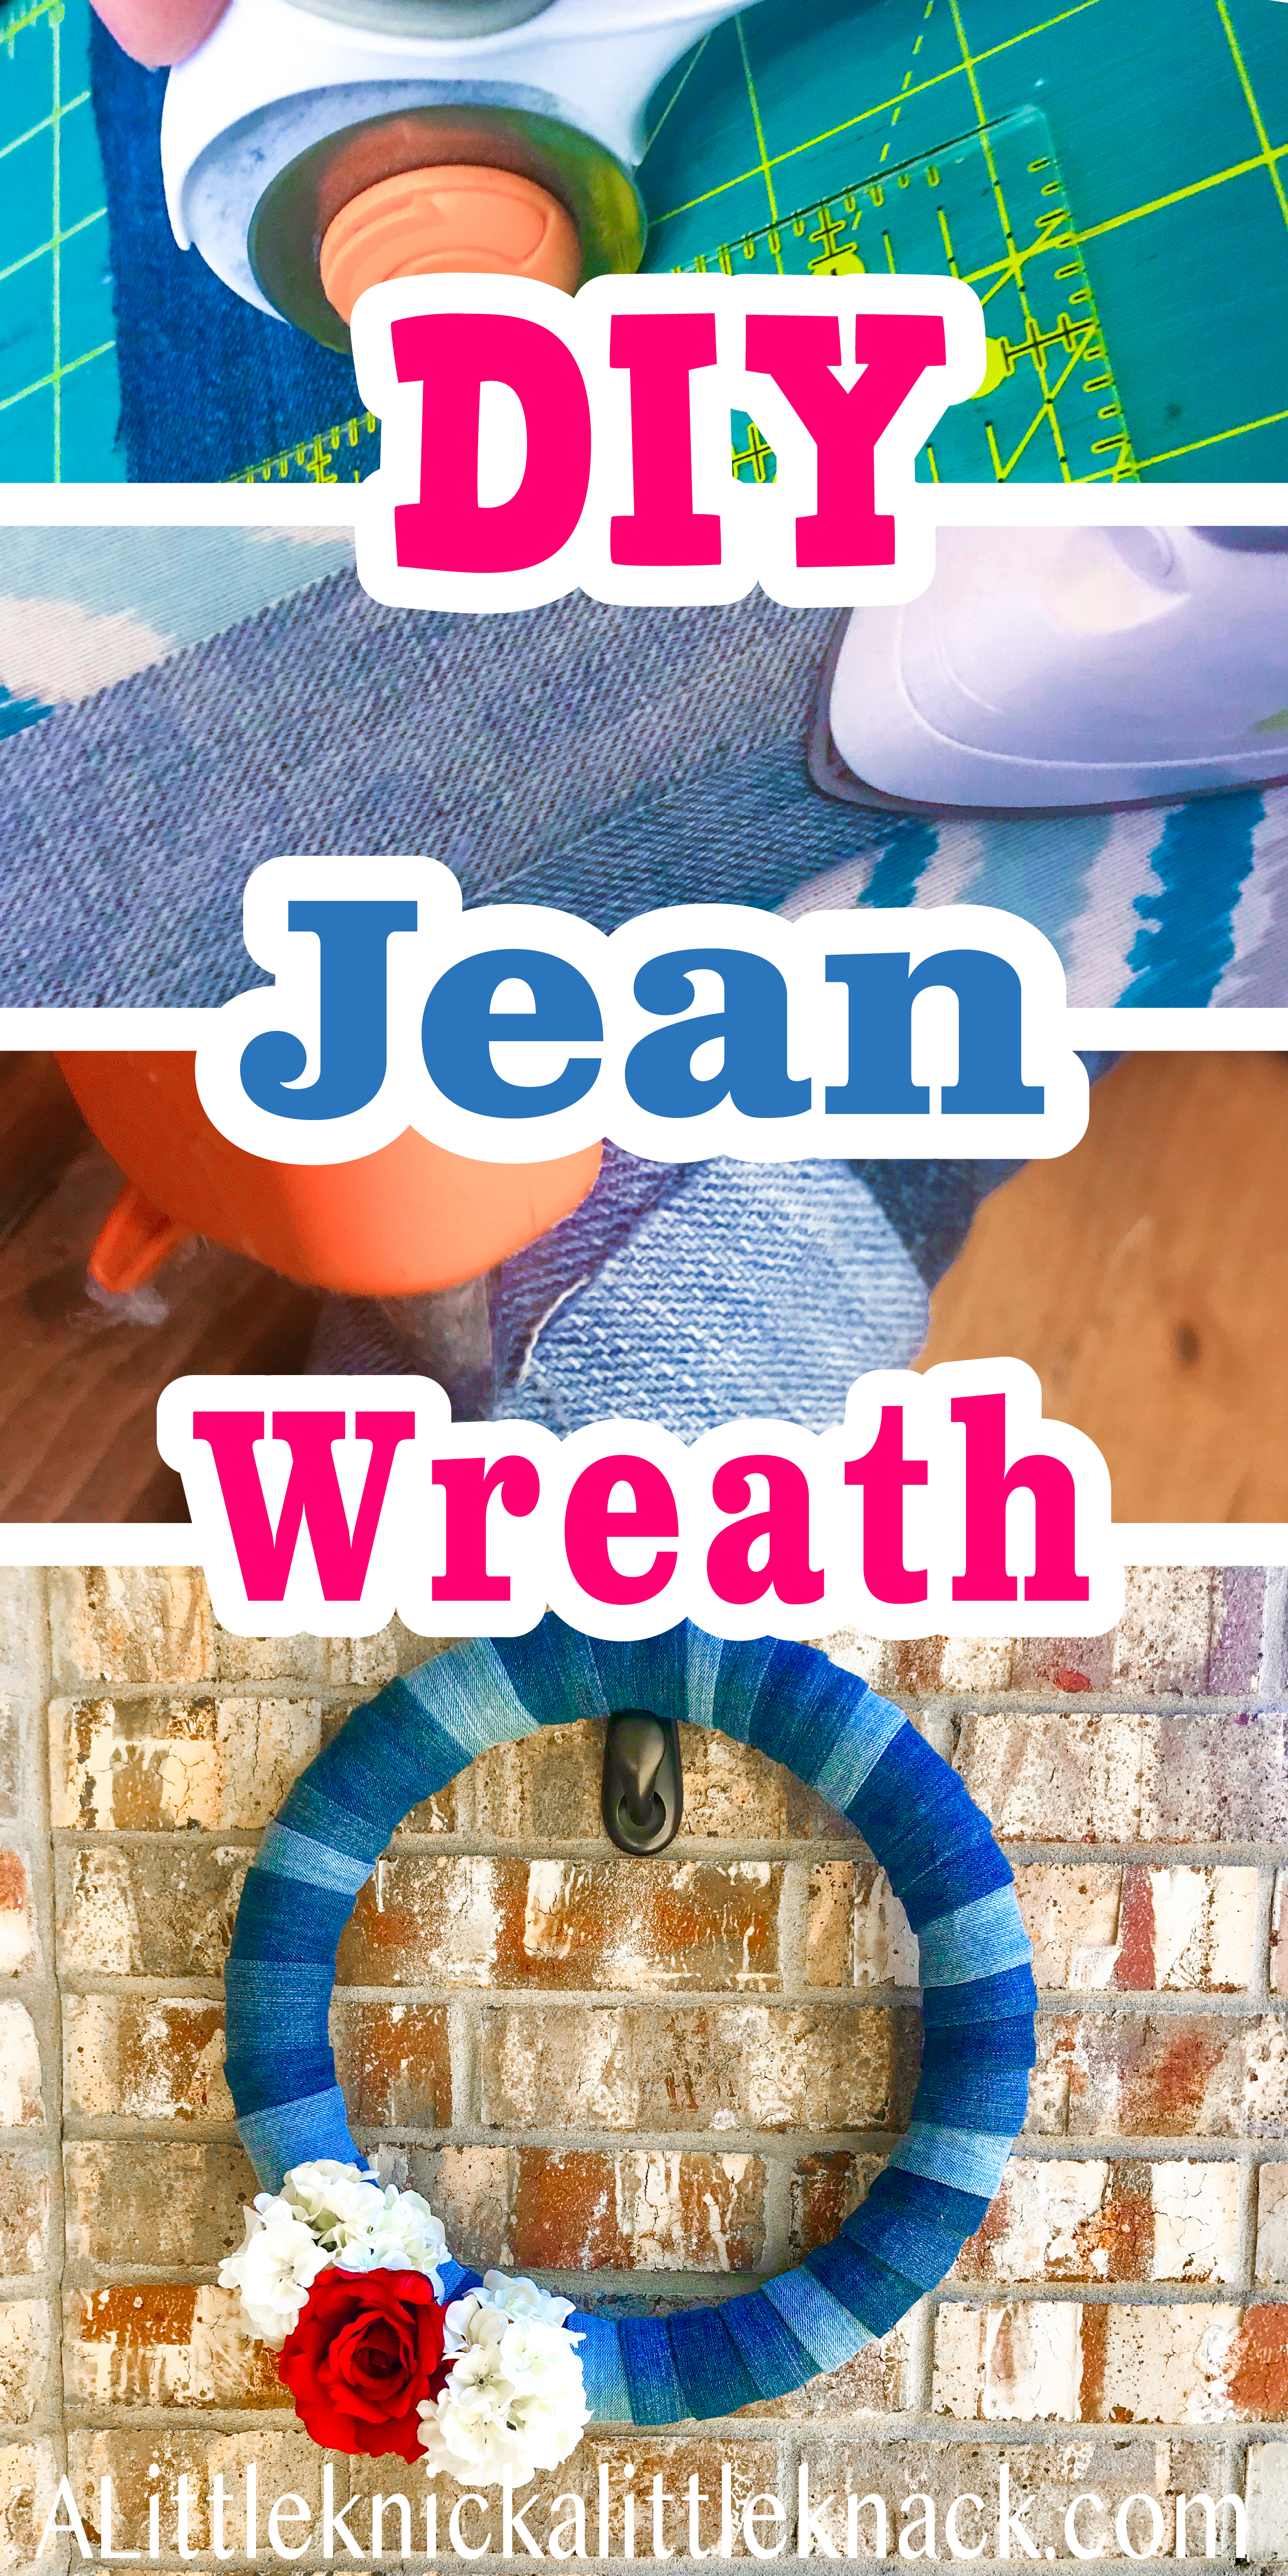 A collage of making a jean wreath with a text overlay.